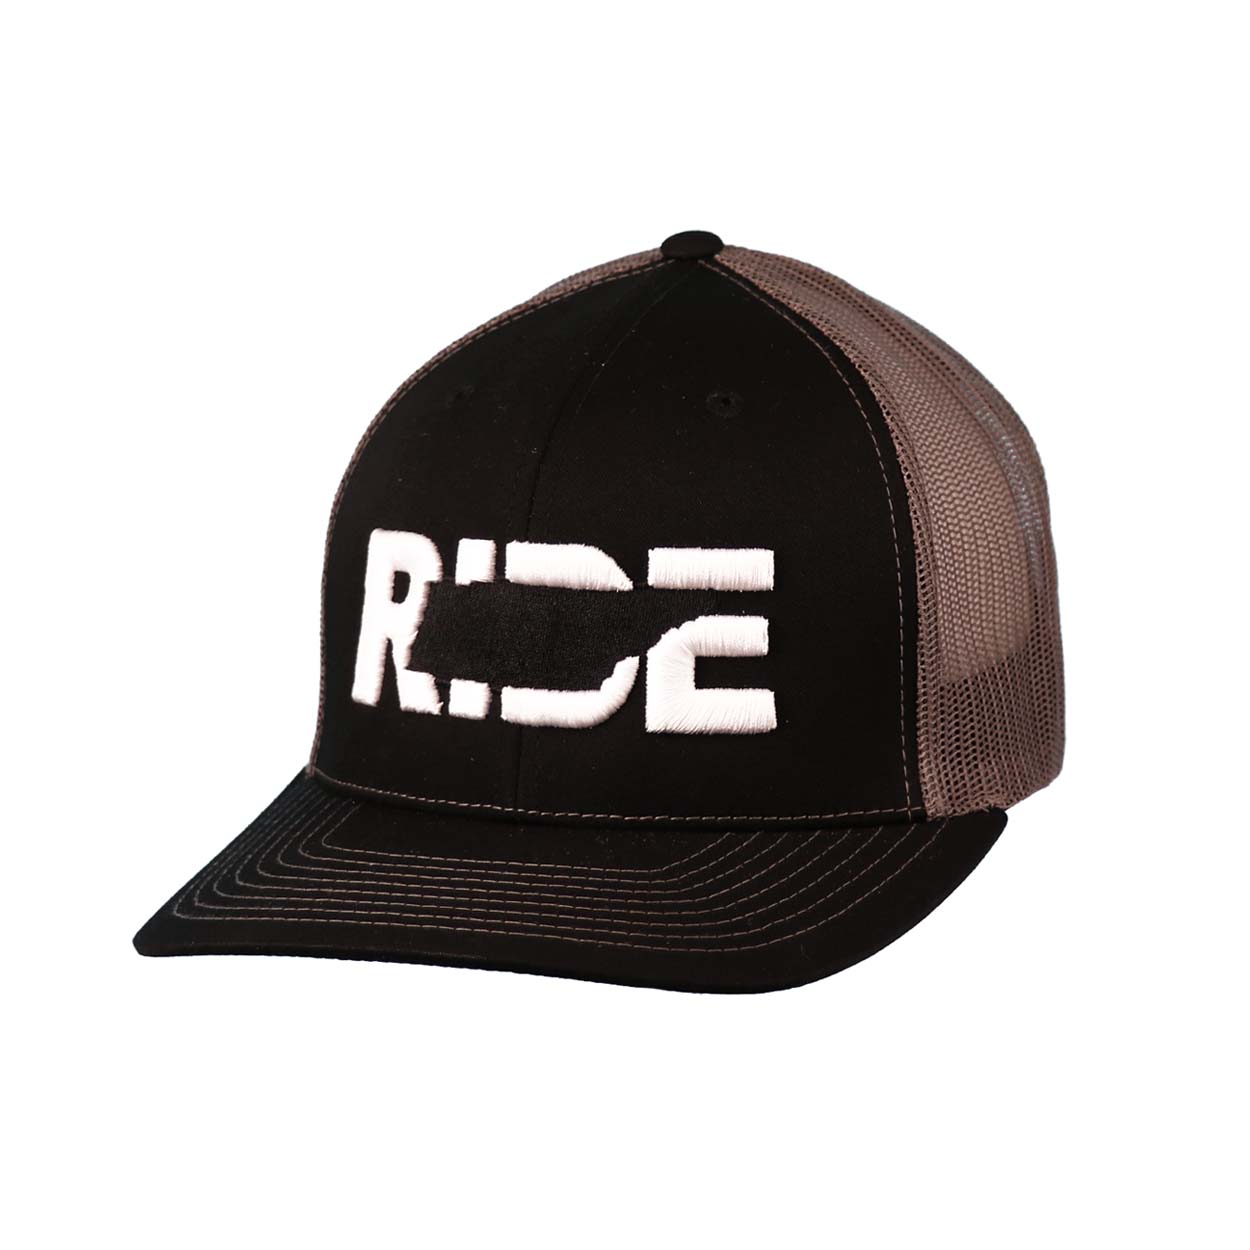 Ride Tennessee Classic Embroidered Snapback Trucker Hat Black/Gray